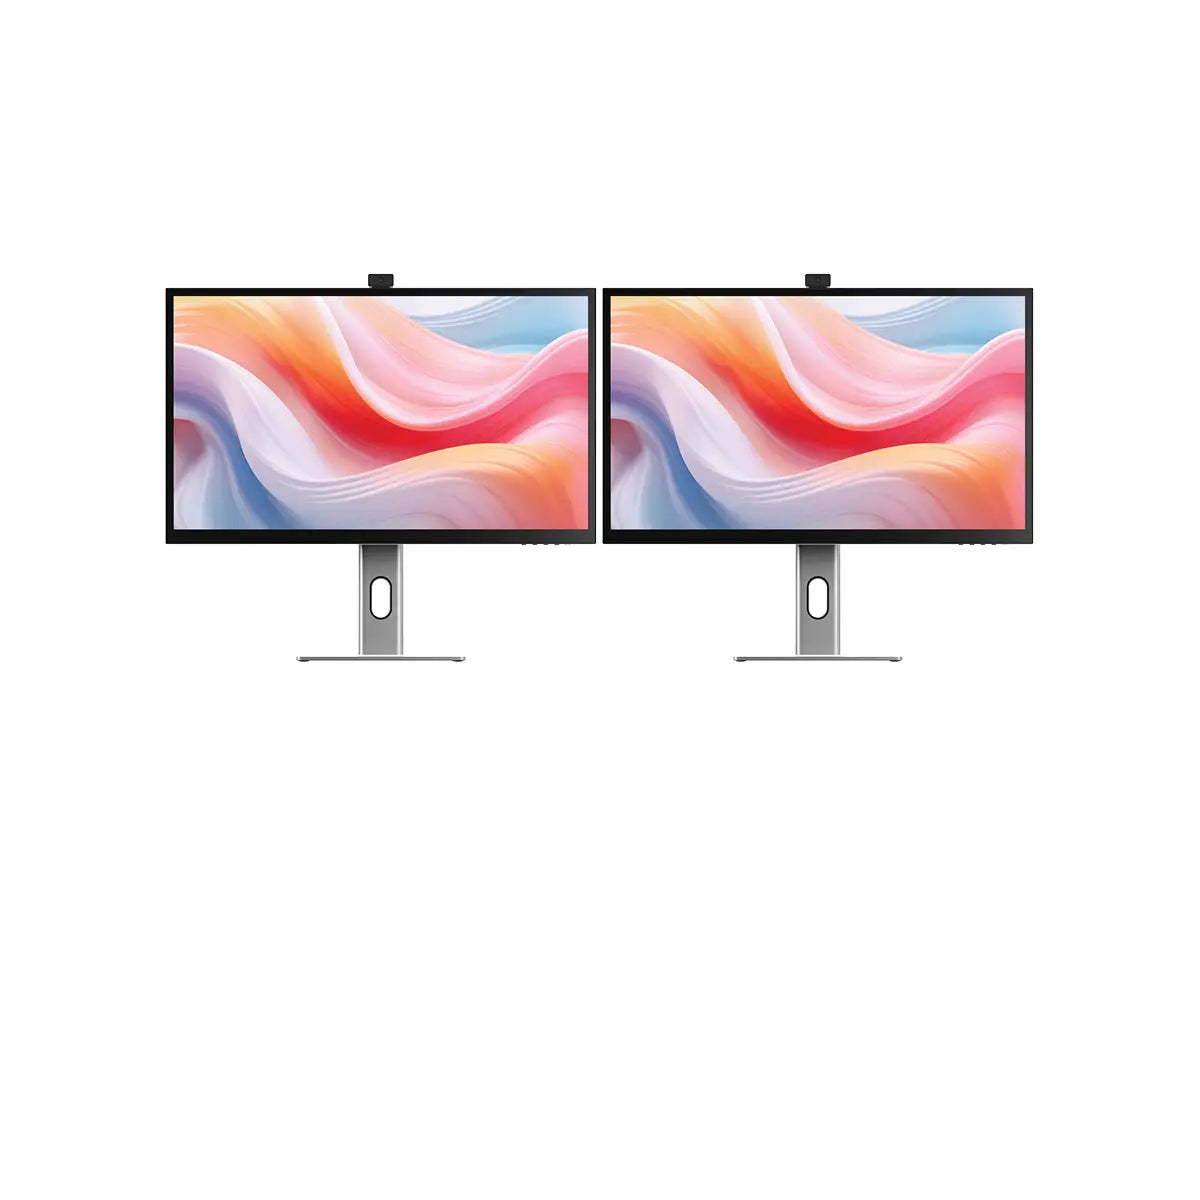 clarity-pro-27-uhd-4k-monitor-with-65w-pd-and-webcam-pack-of-2_1